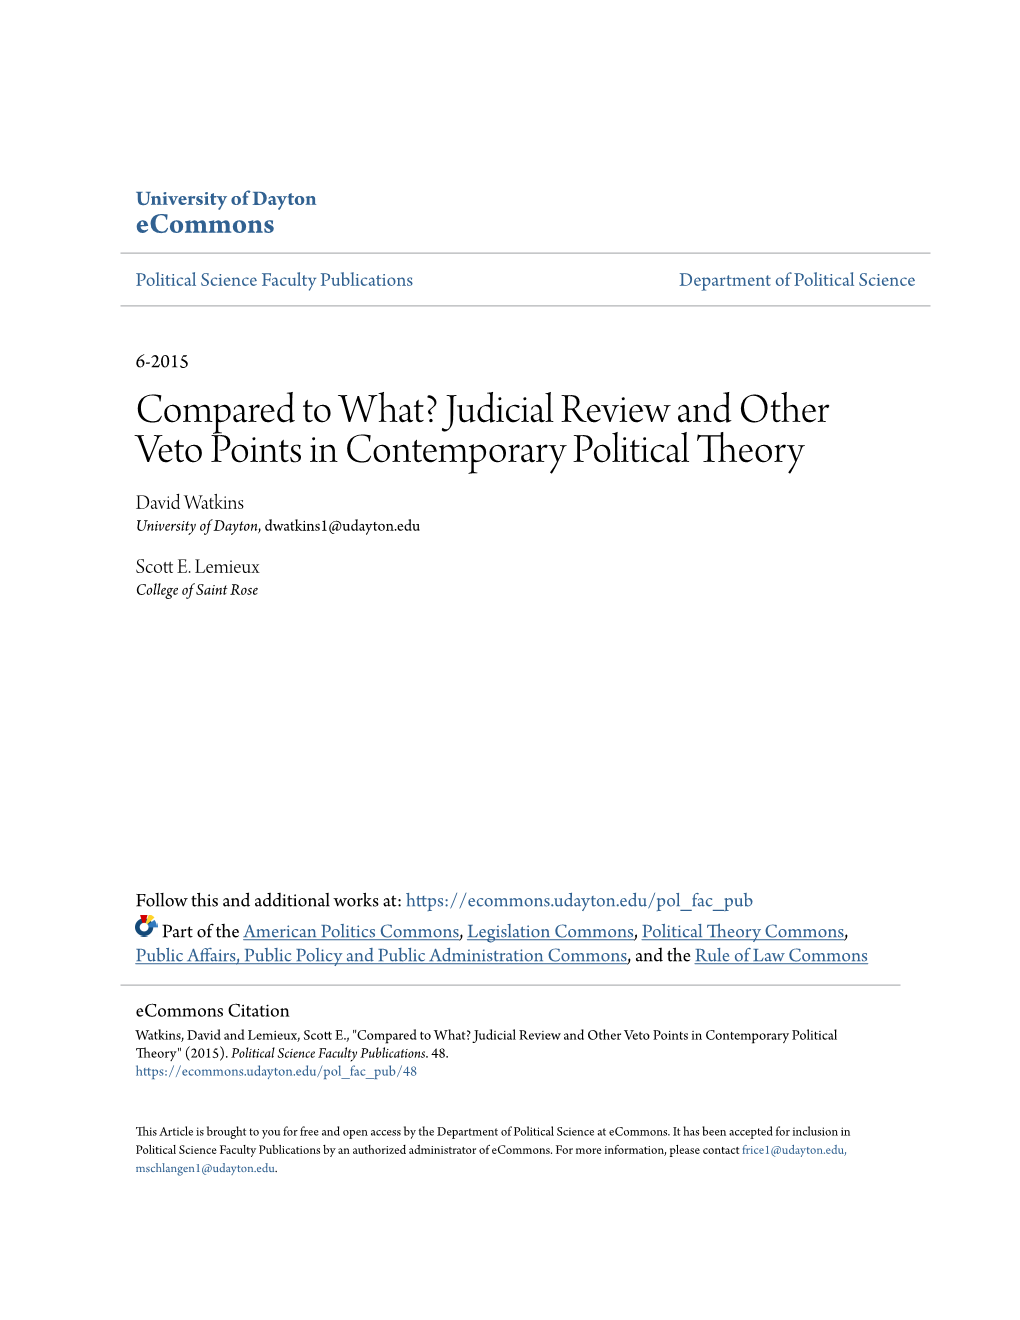 Judicial Review and Other Veto Points in Contemporary Political Theory David Watkins University of Dayton, Dwatkins1@Udayton.Edu